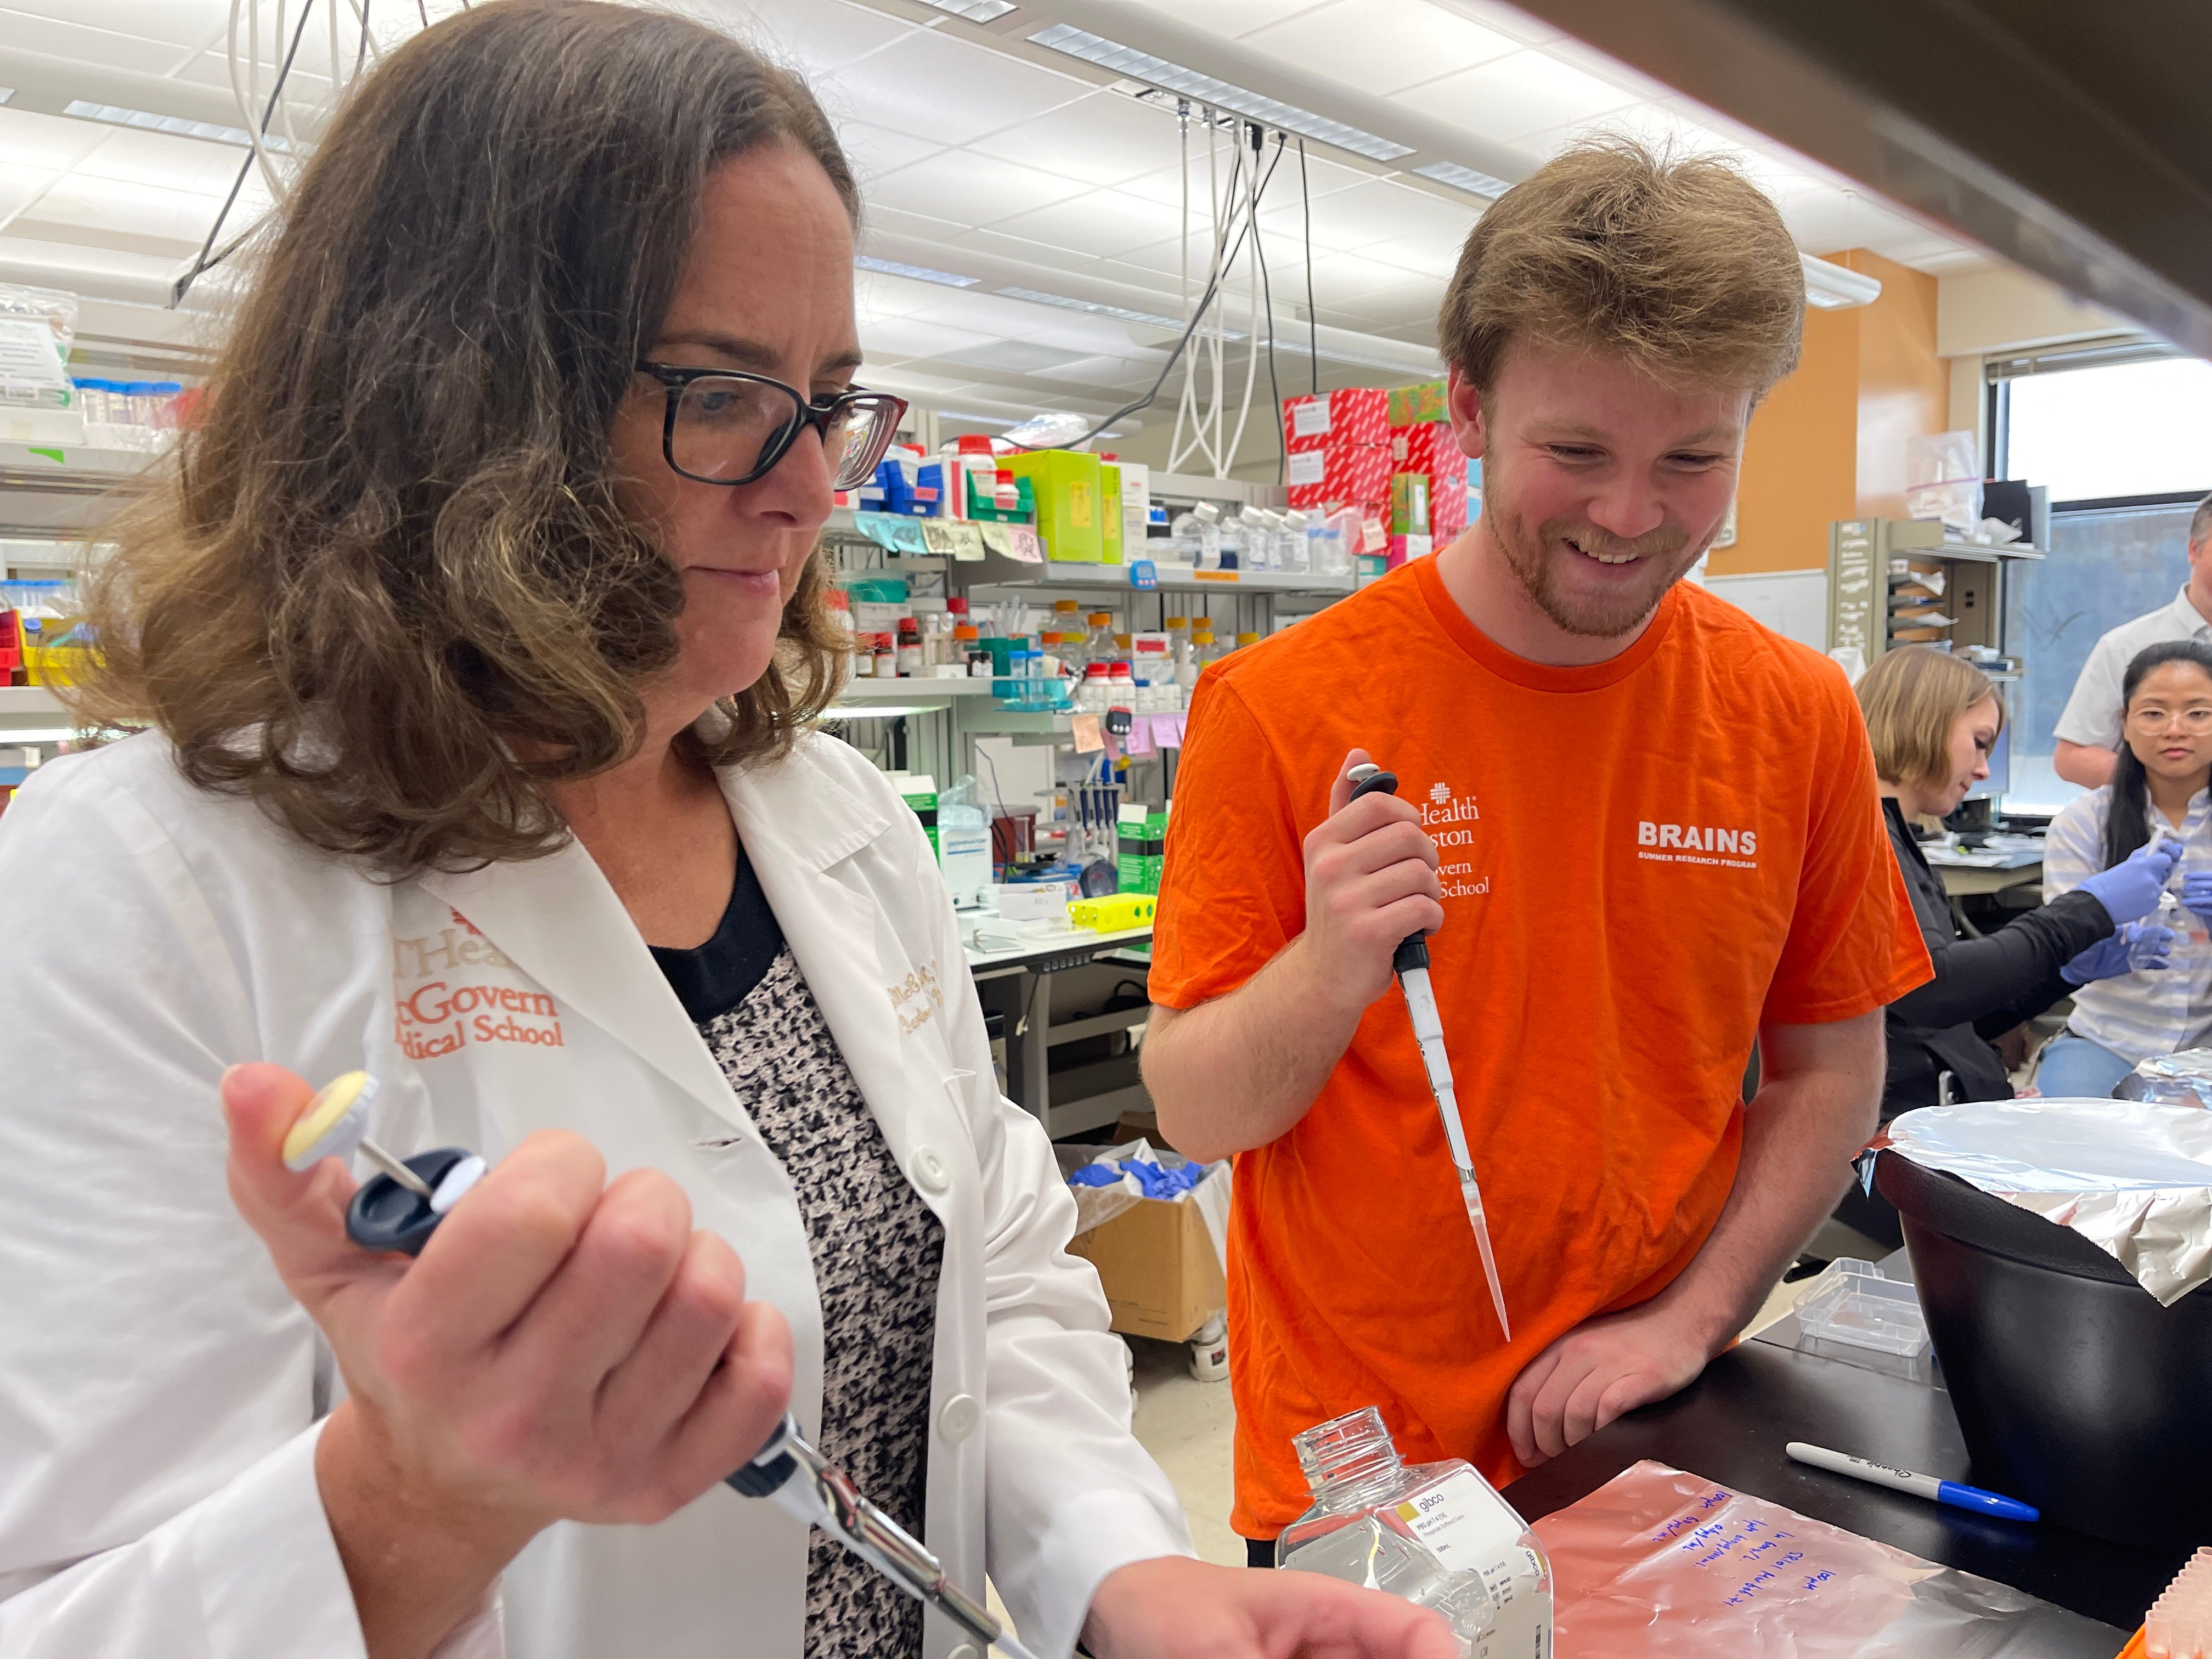 Jack Monday, 19, (right) spent his third summer in the BRAINS research laboratory with Louise McCullough, MD, PhD, (left) professor and co-director of the Department of Neurology with McGovern Medical School at UTHealth Houston.